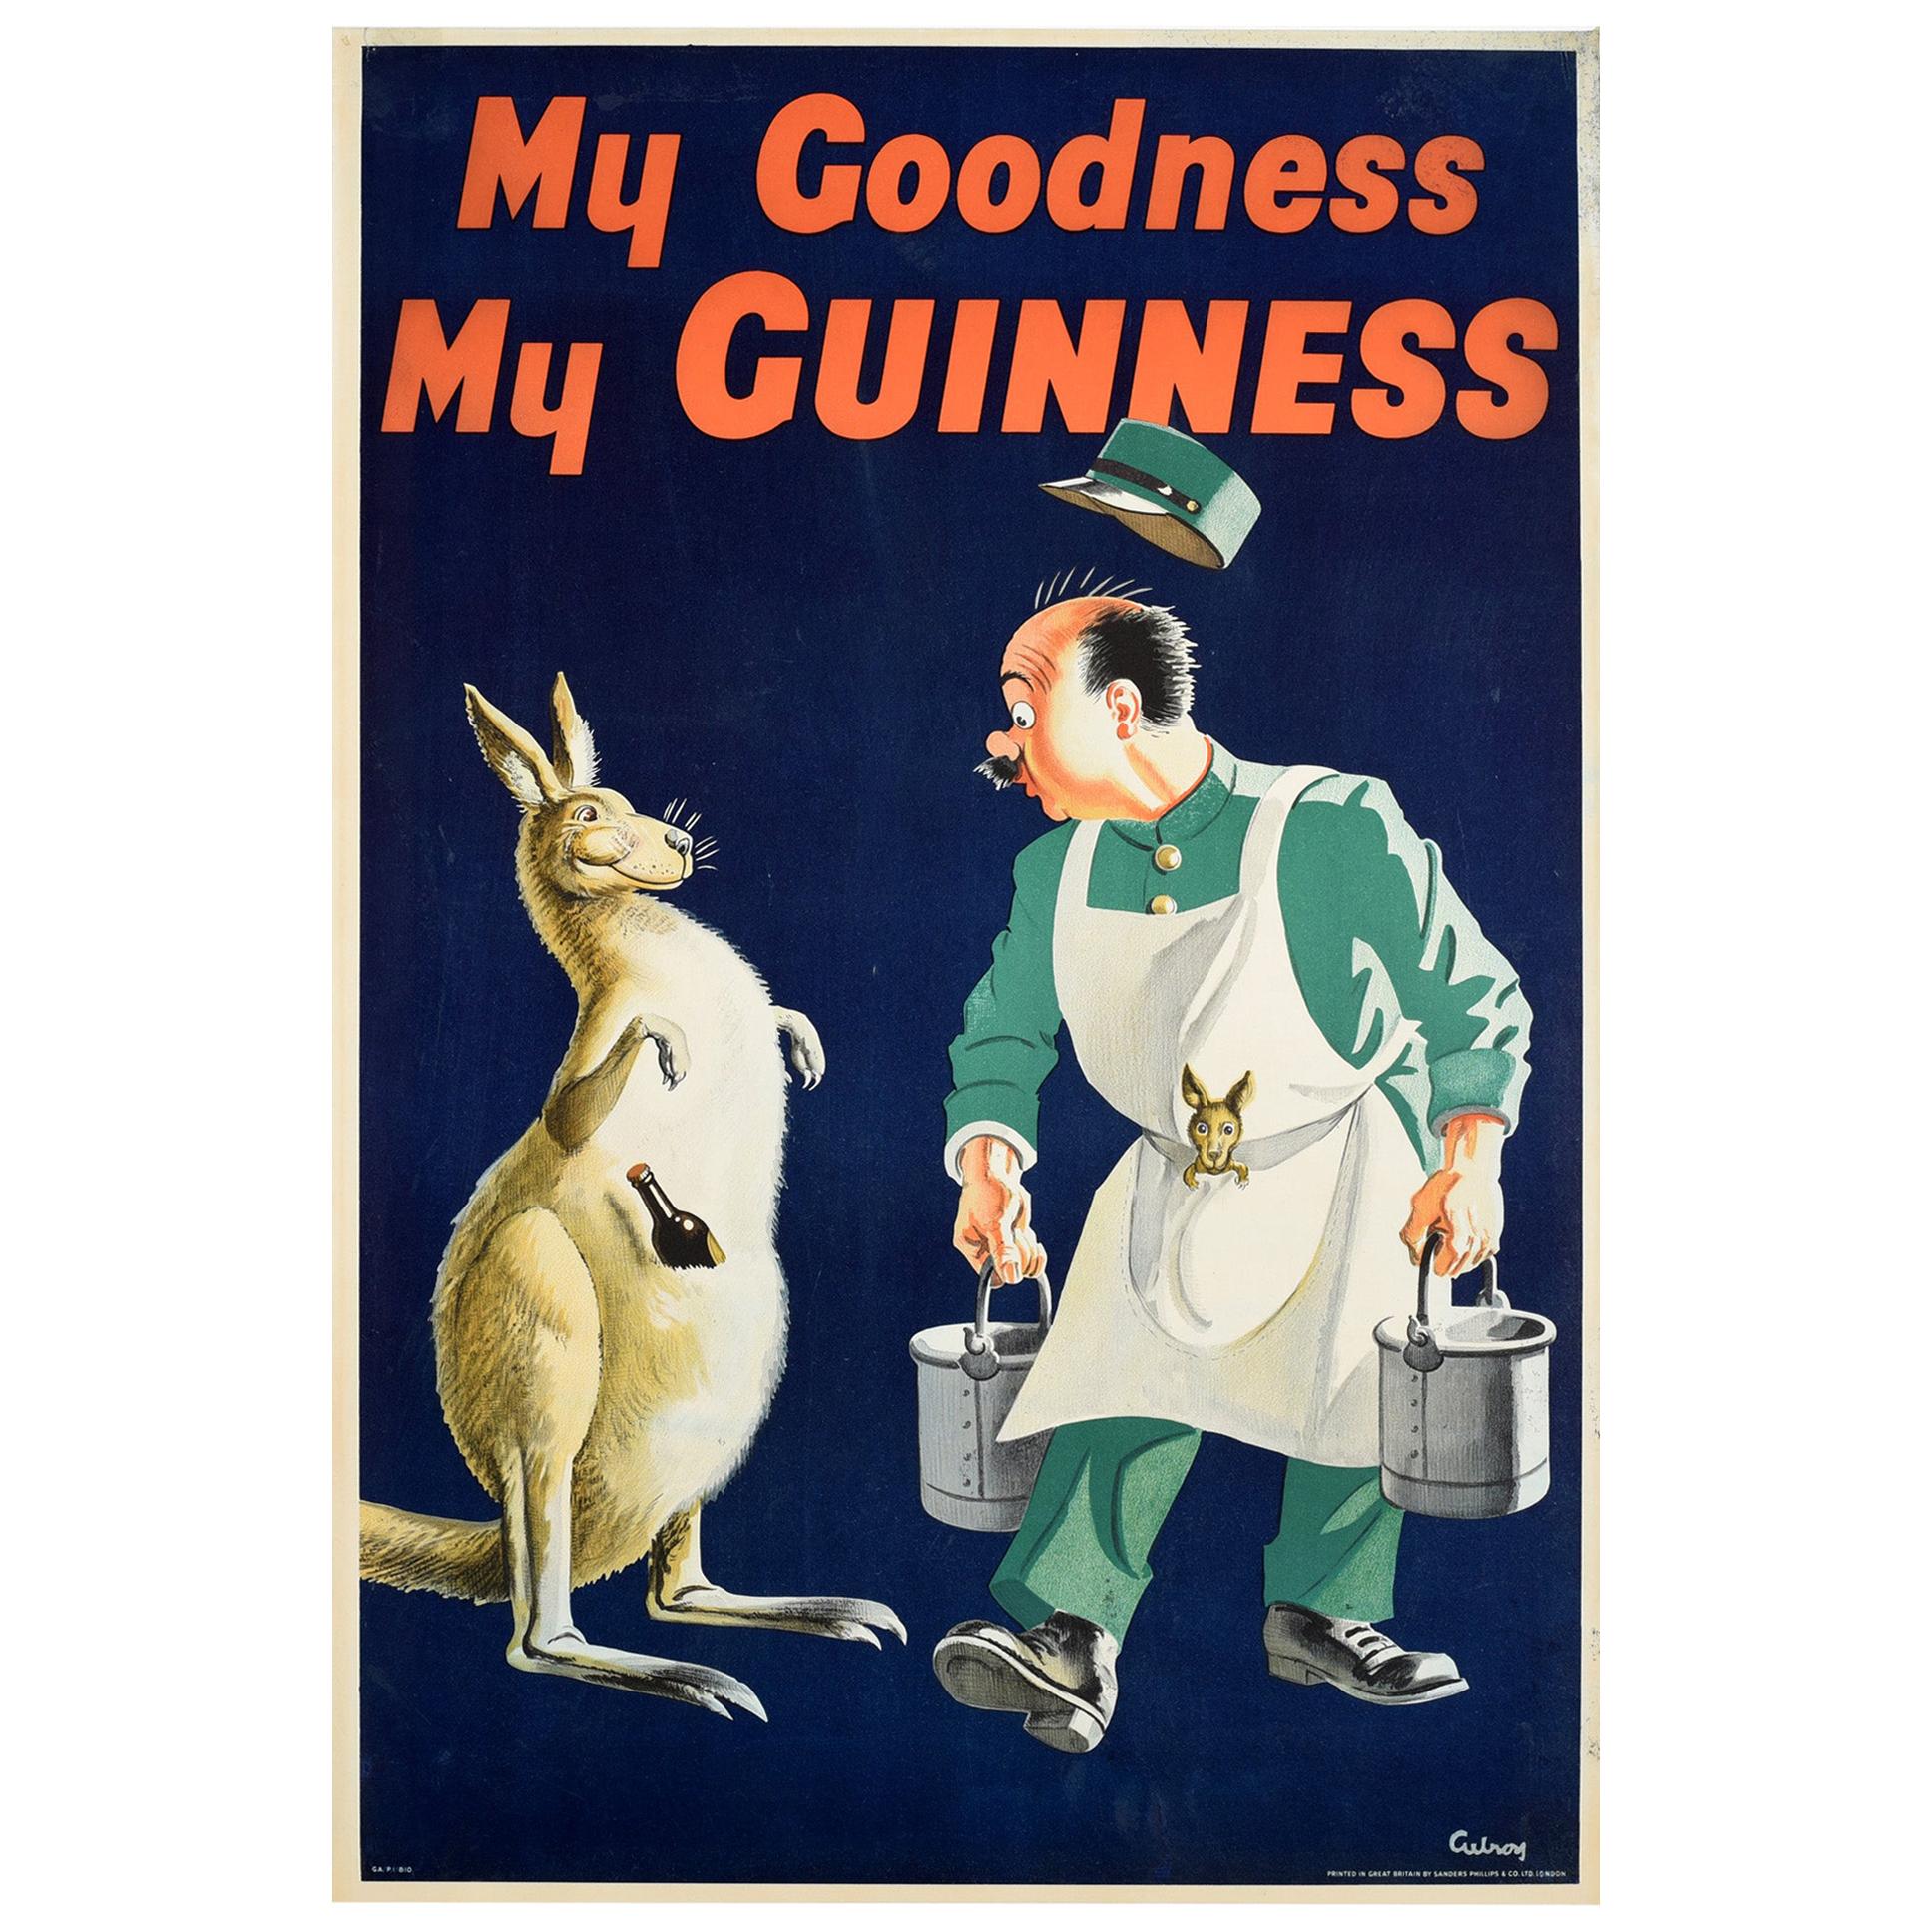 Original Vintage Drink Poster My Goodness My Guinness Kangaroo Beer Bottle Pouch